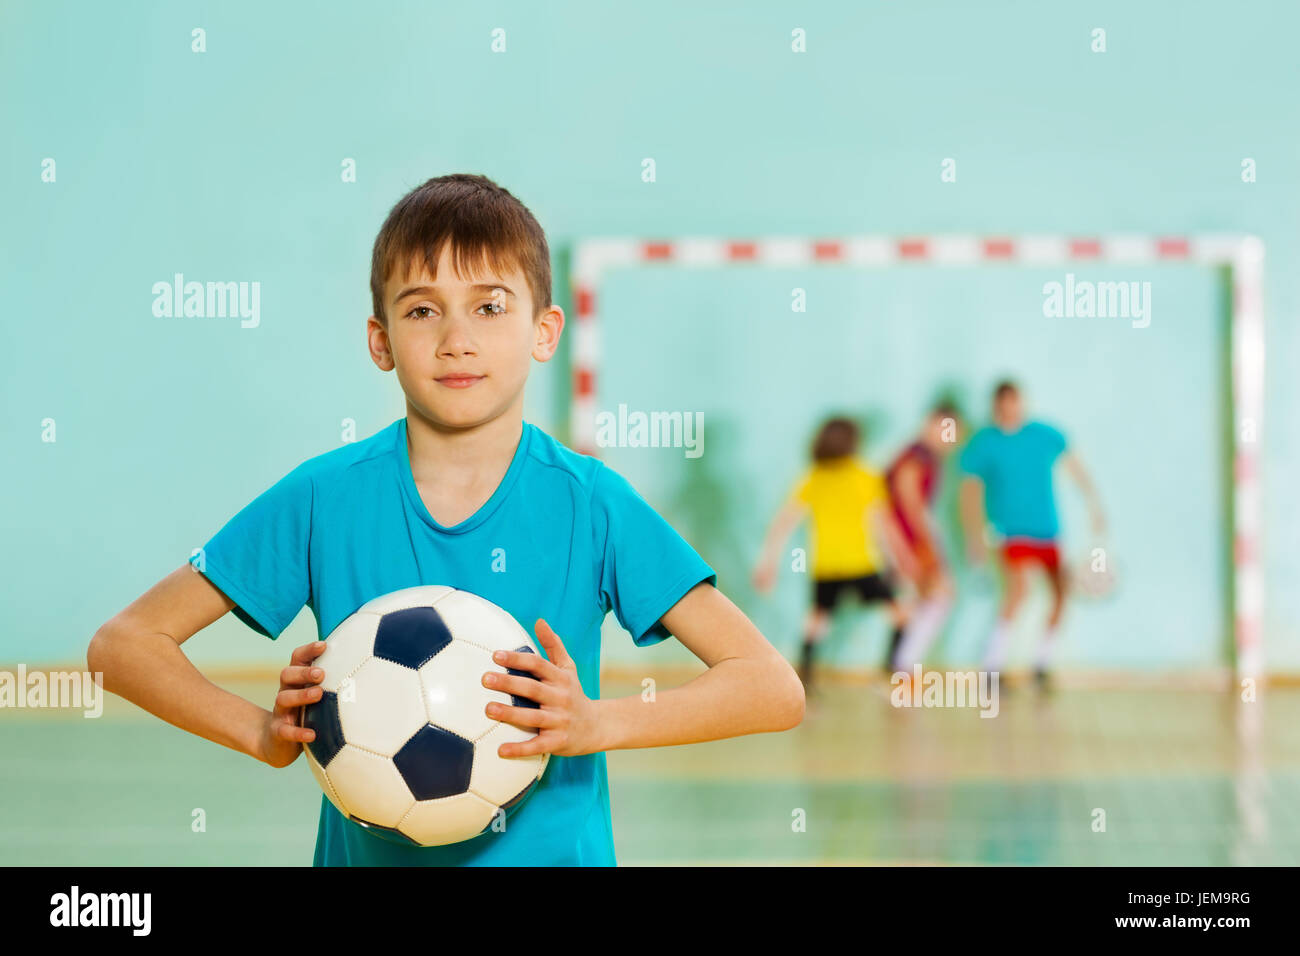 Young football player ready to throw soccer ball Stock Photo